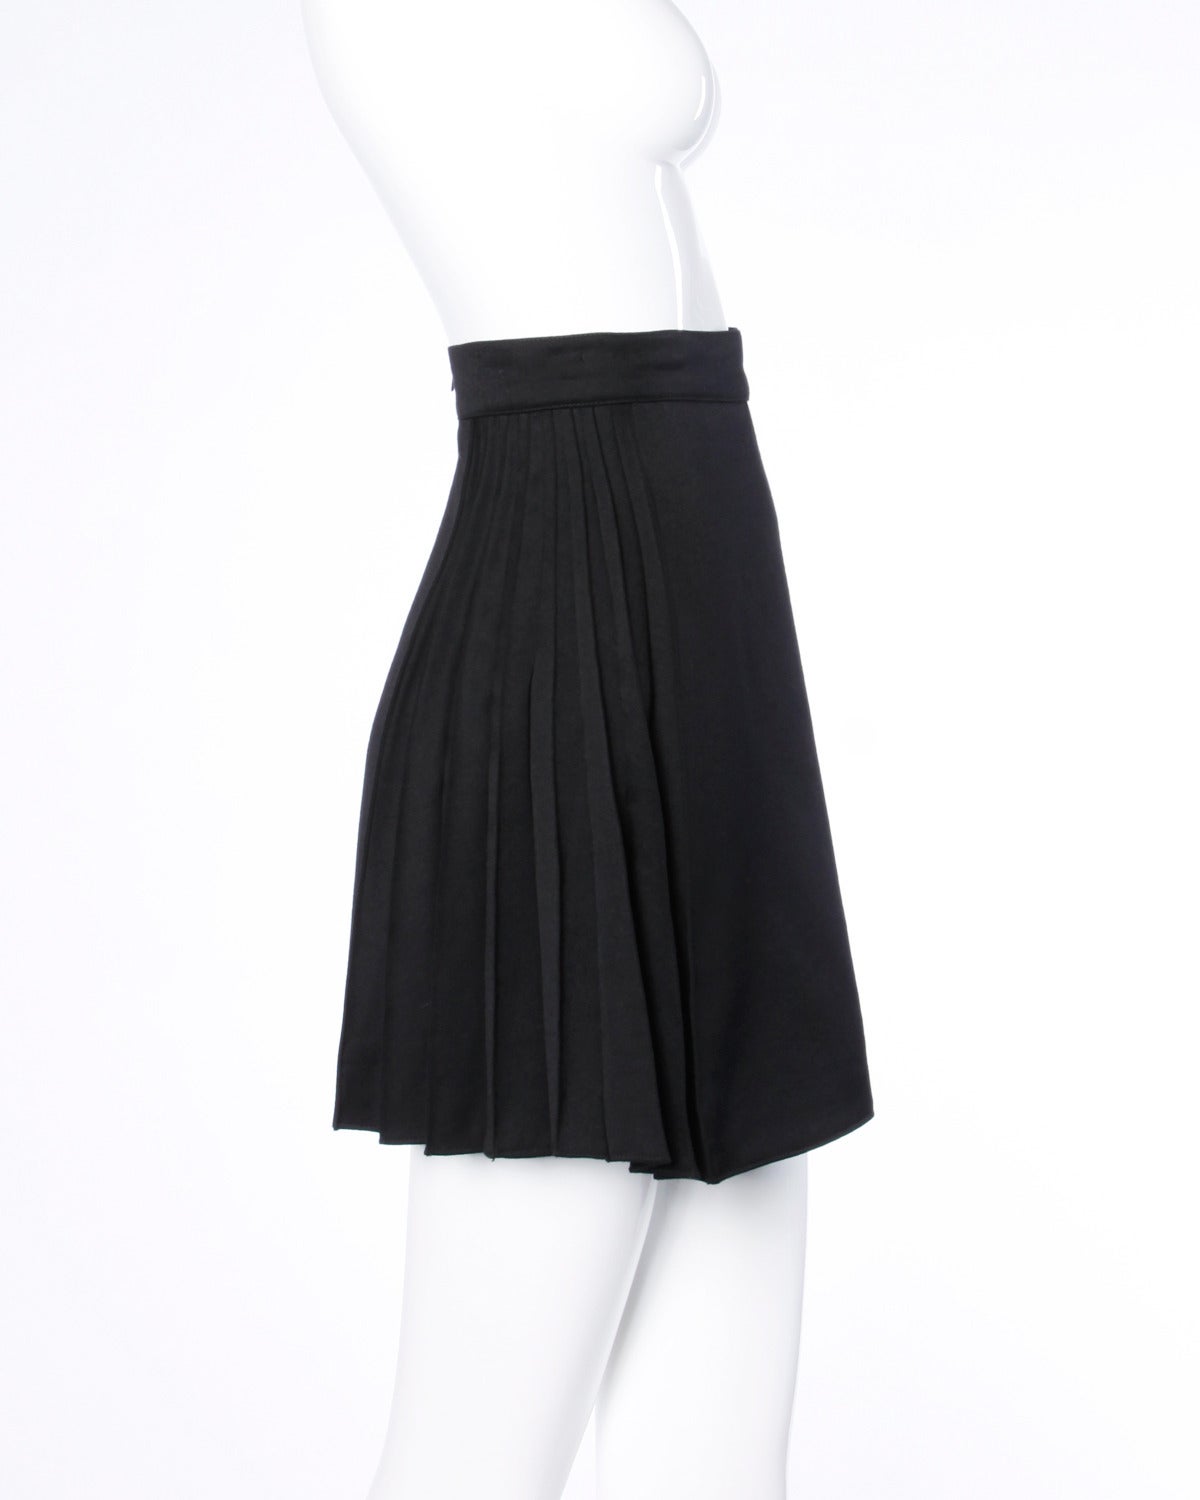 Black mini skirt with accordion pleated side panels by Claude Montana.

Details:

Fully Lined
Back Zip Closure
Marked Size: 40/ 6
Color: Black
Label: Montana CLAUDE MONTANA PARIS

Measurements:

Waist: 26